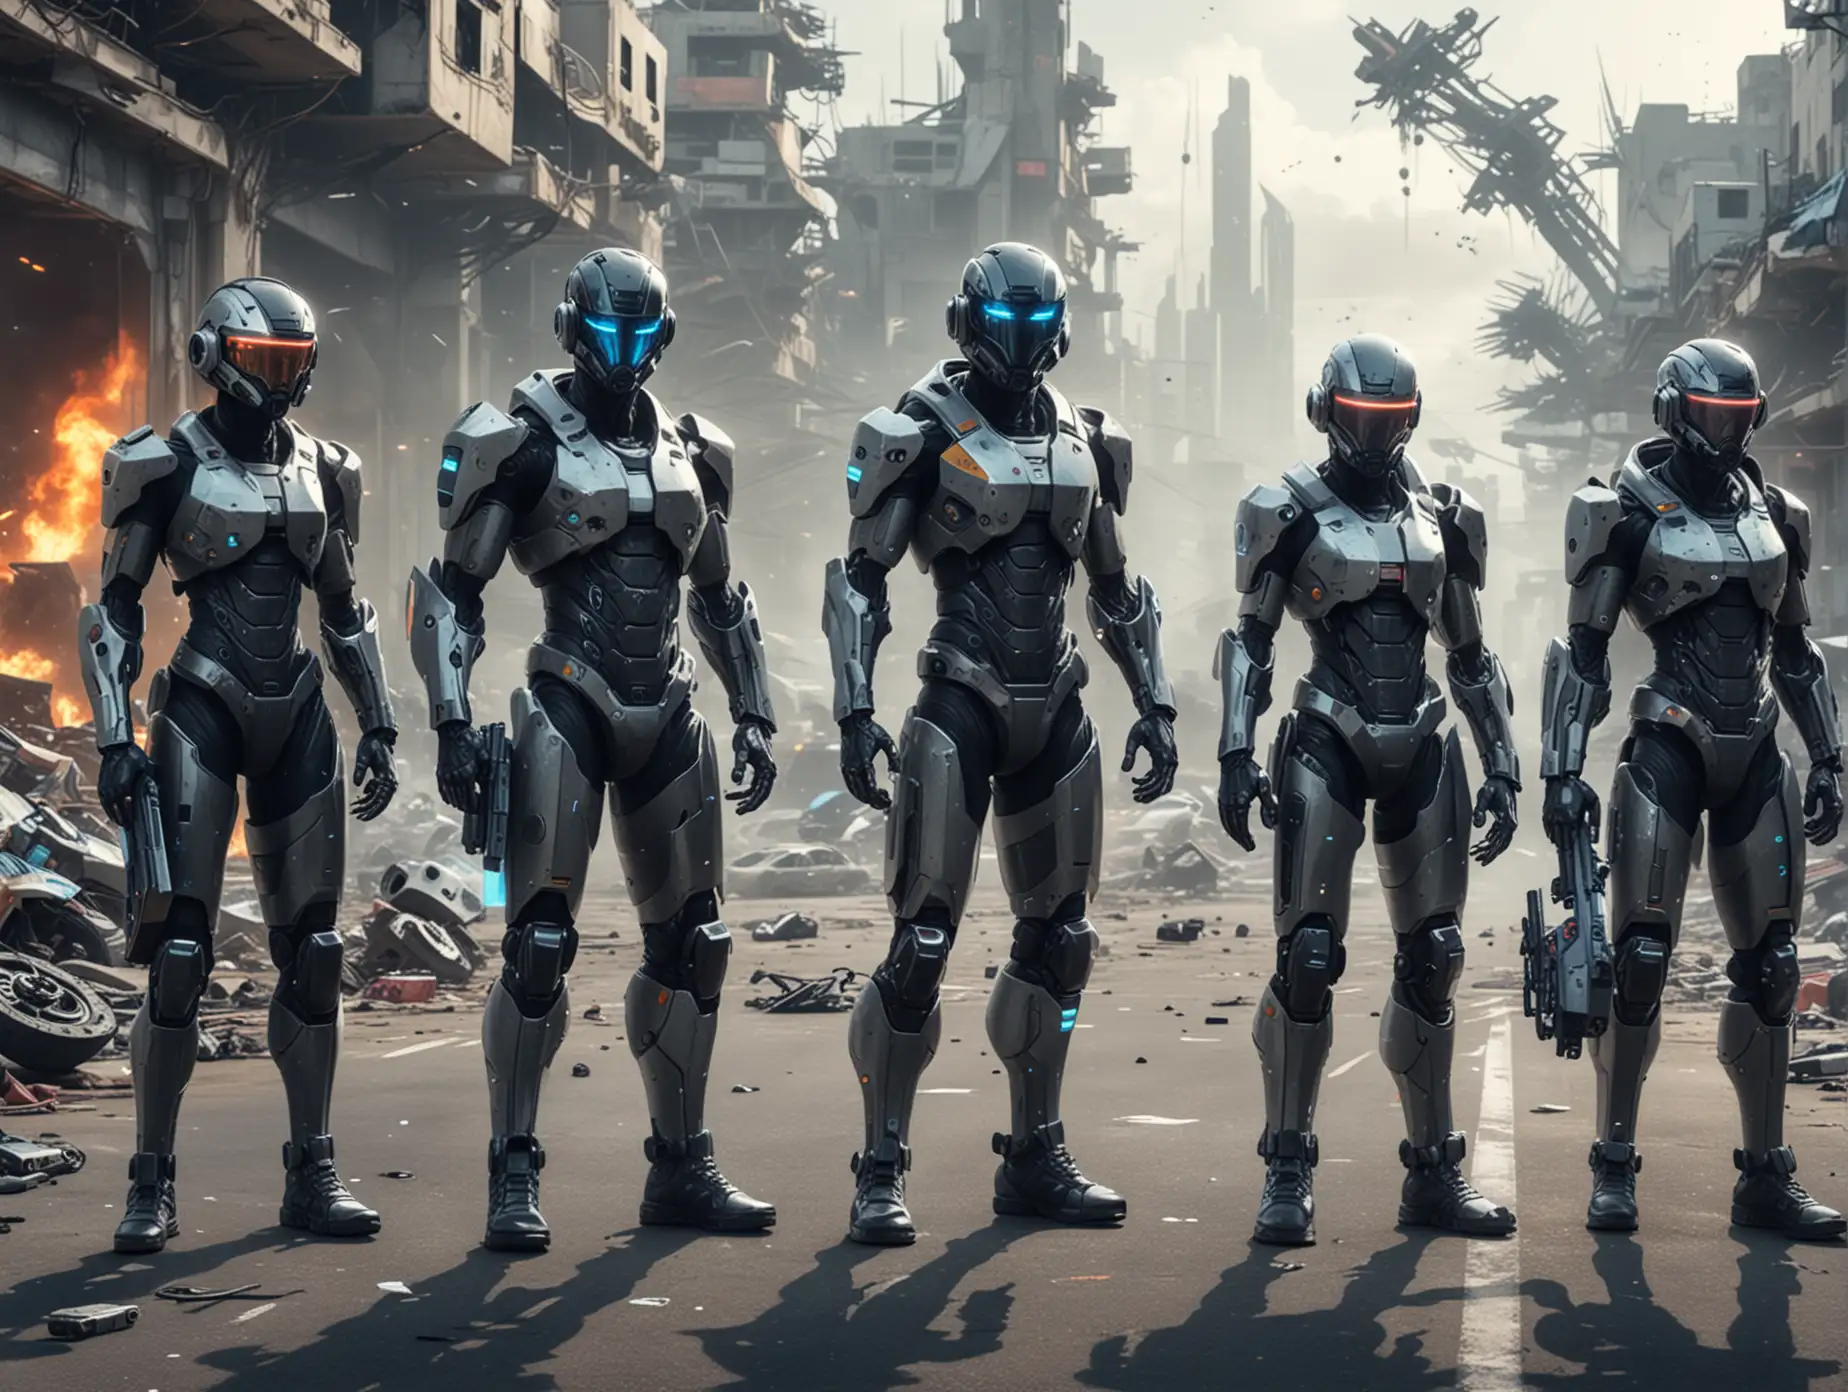 a futuristic group of cyber-tech peoples with cyber mobiles and remote controls in their hands, and equipped with cyber helmets.n In the background a hyperfuturistic destroyed city and many futuristic vehicles like motorbikes, skateboards, spaceships and drones.